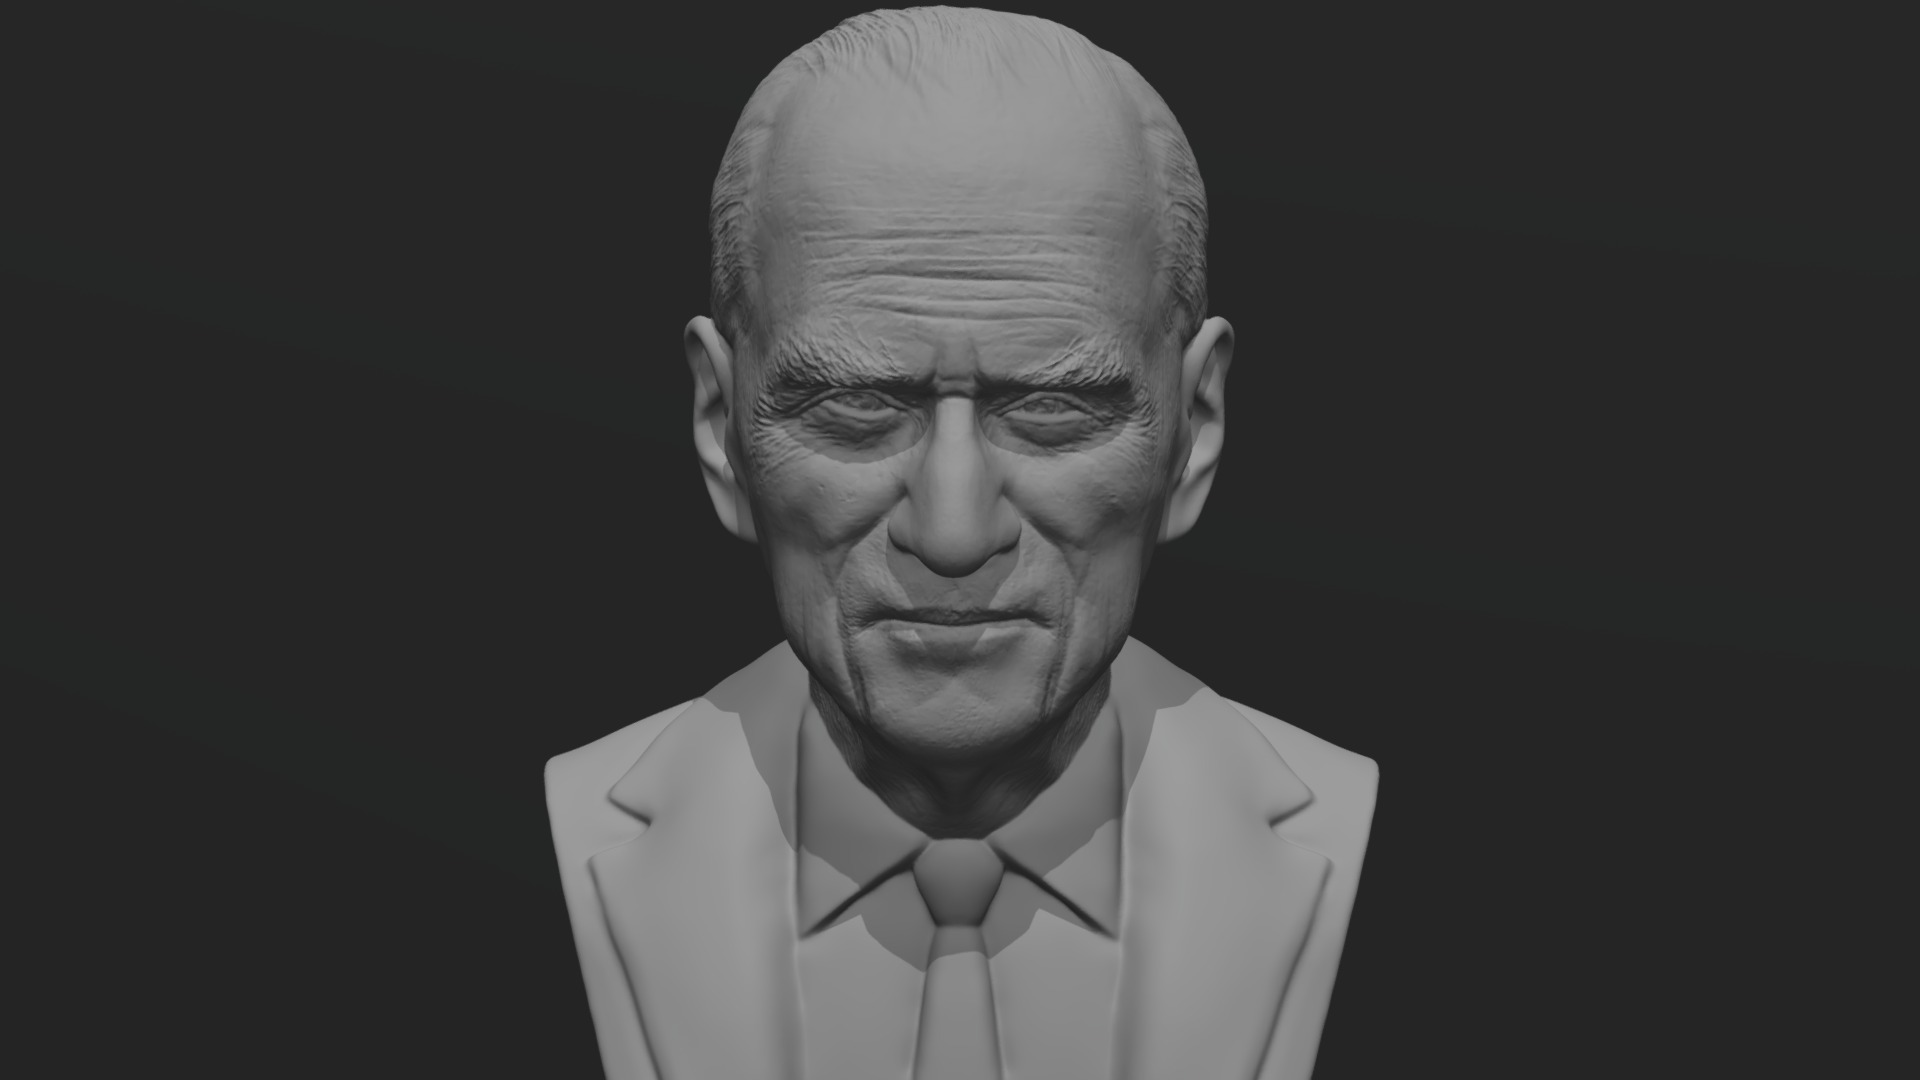 3D model Prince Philip bust for 3D printing - This is a 3D model of the Prince Philip bust for 3D printing. The 3D model is about a man wearing glasses.